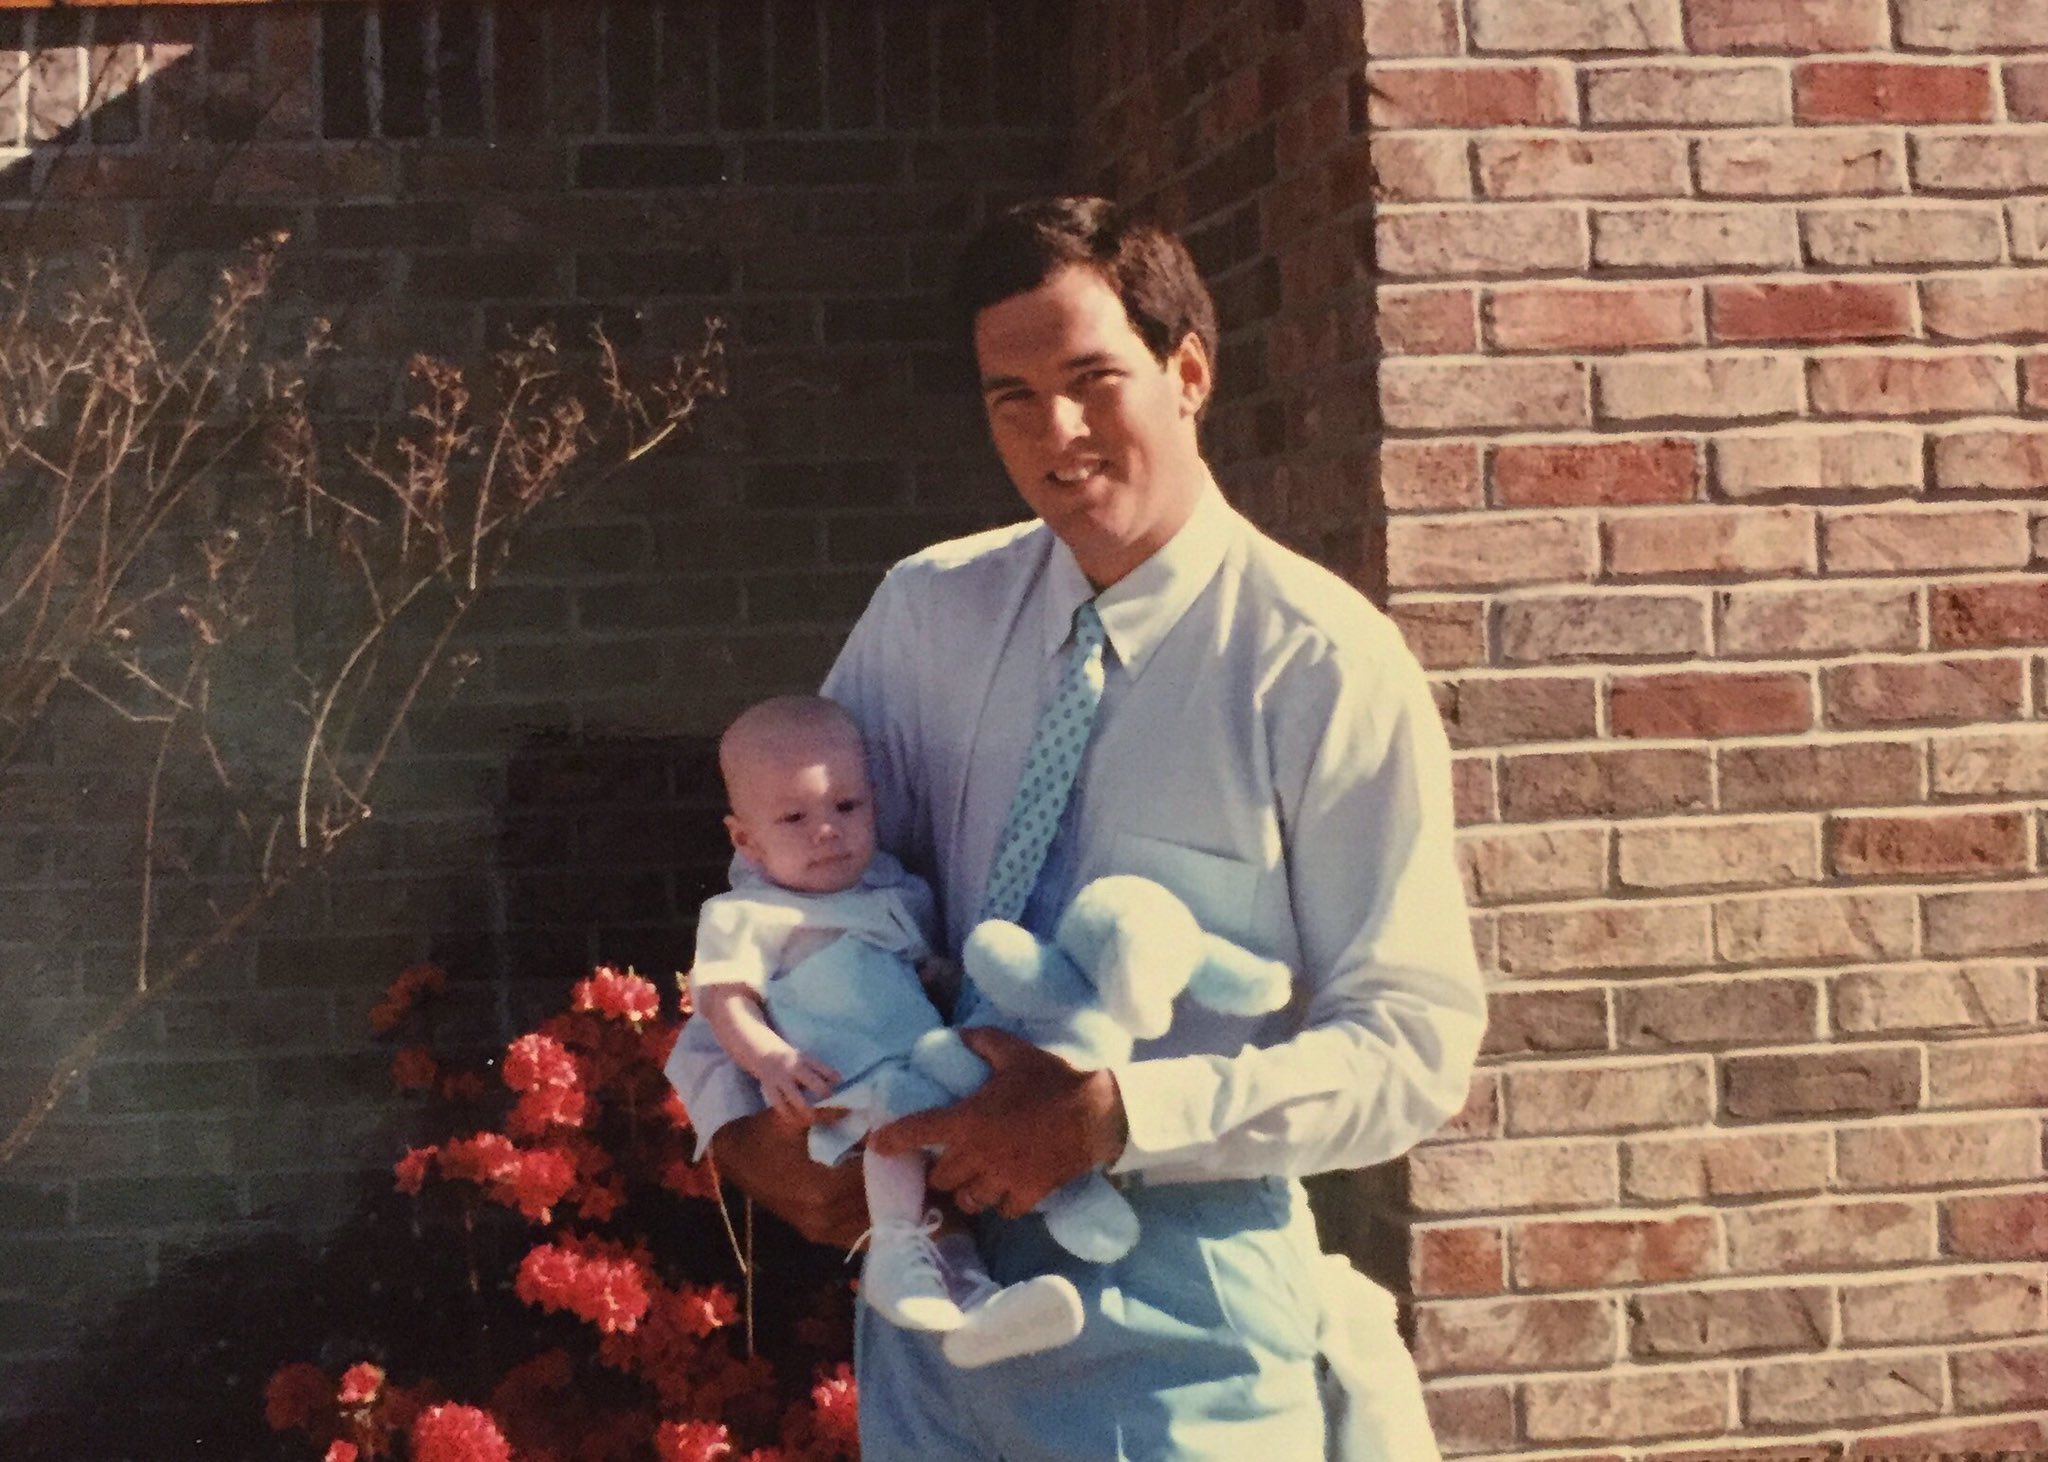 Happy birthday, dad! You sure could rock the pastel blue pants back in the day.   